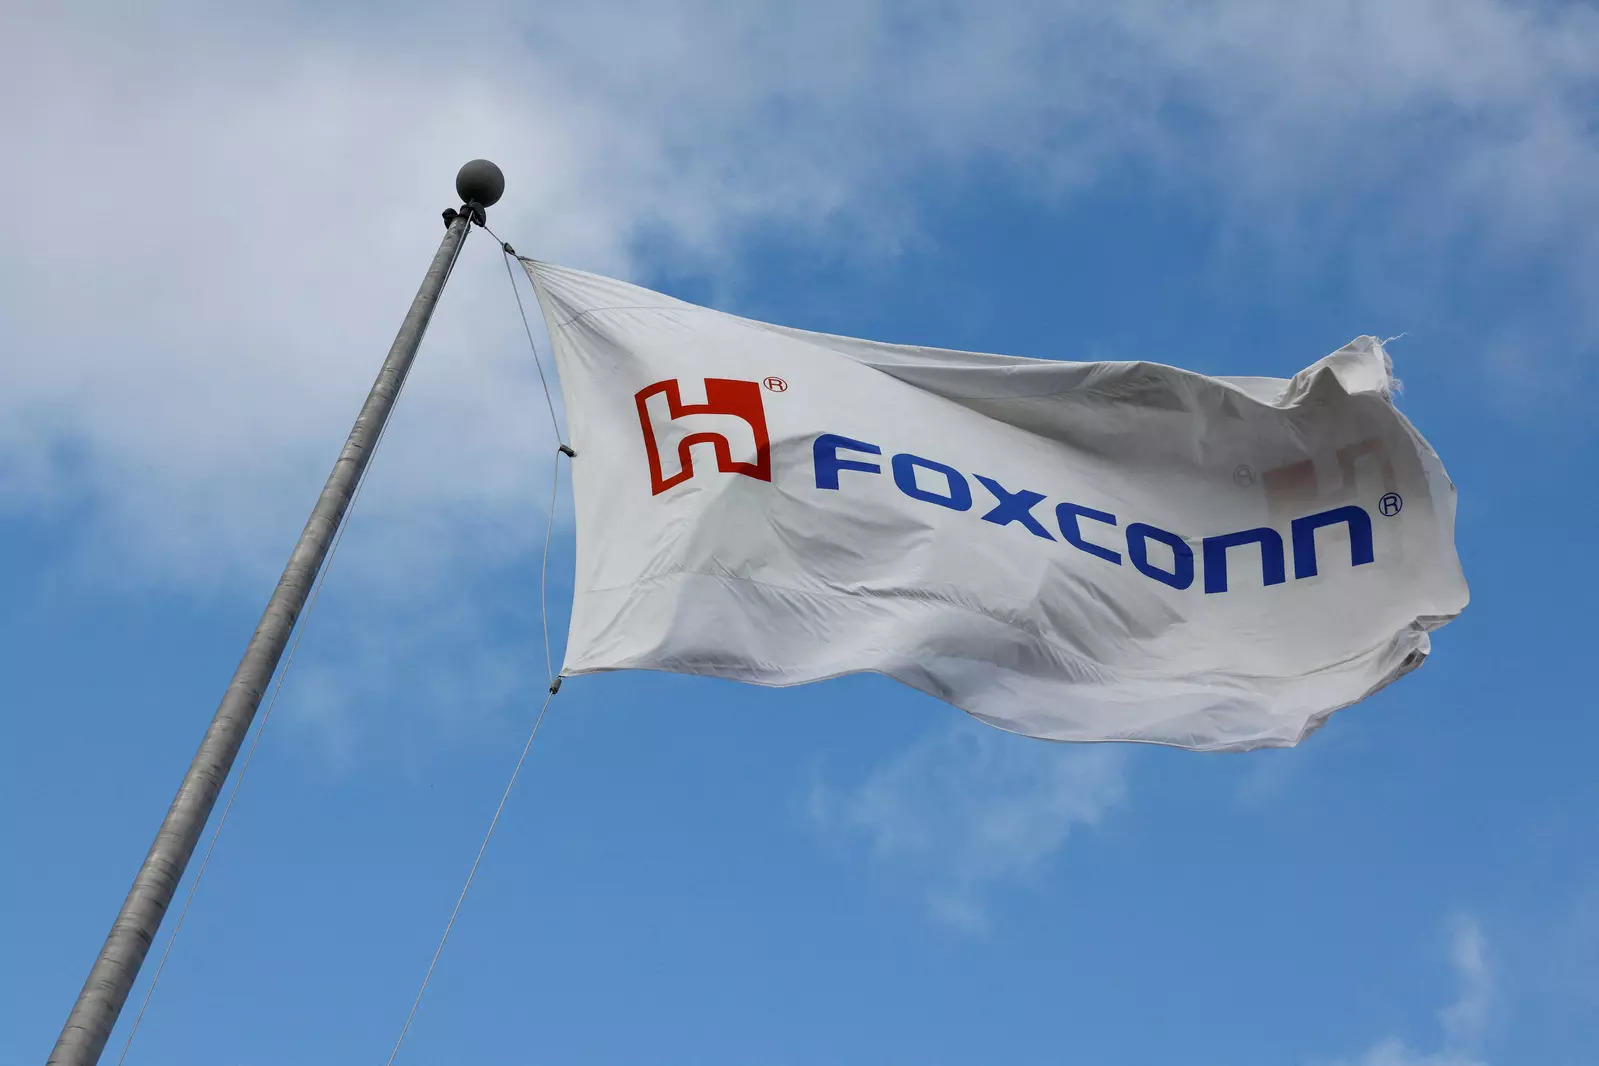 Foxconn produces electric vehicles in Ohio